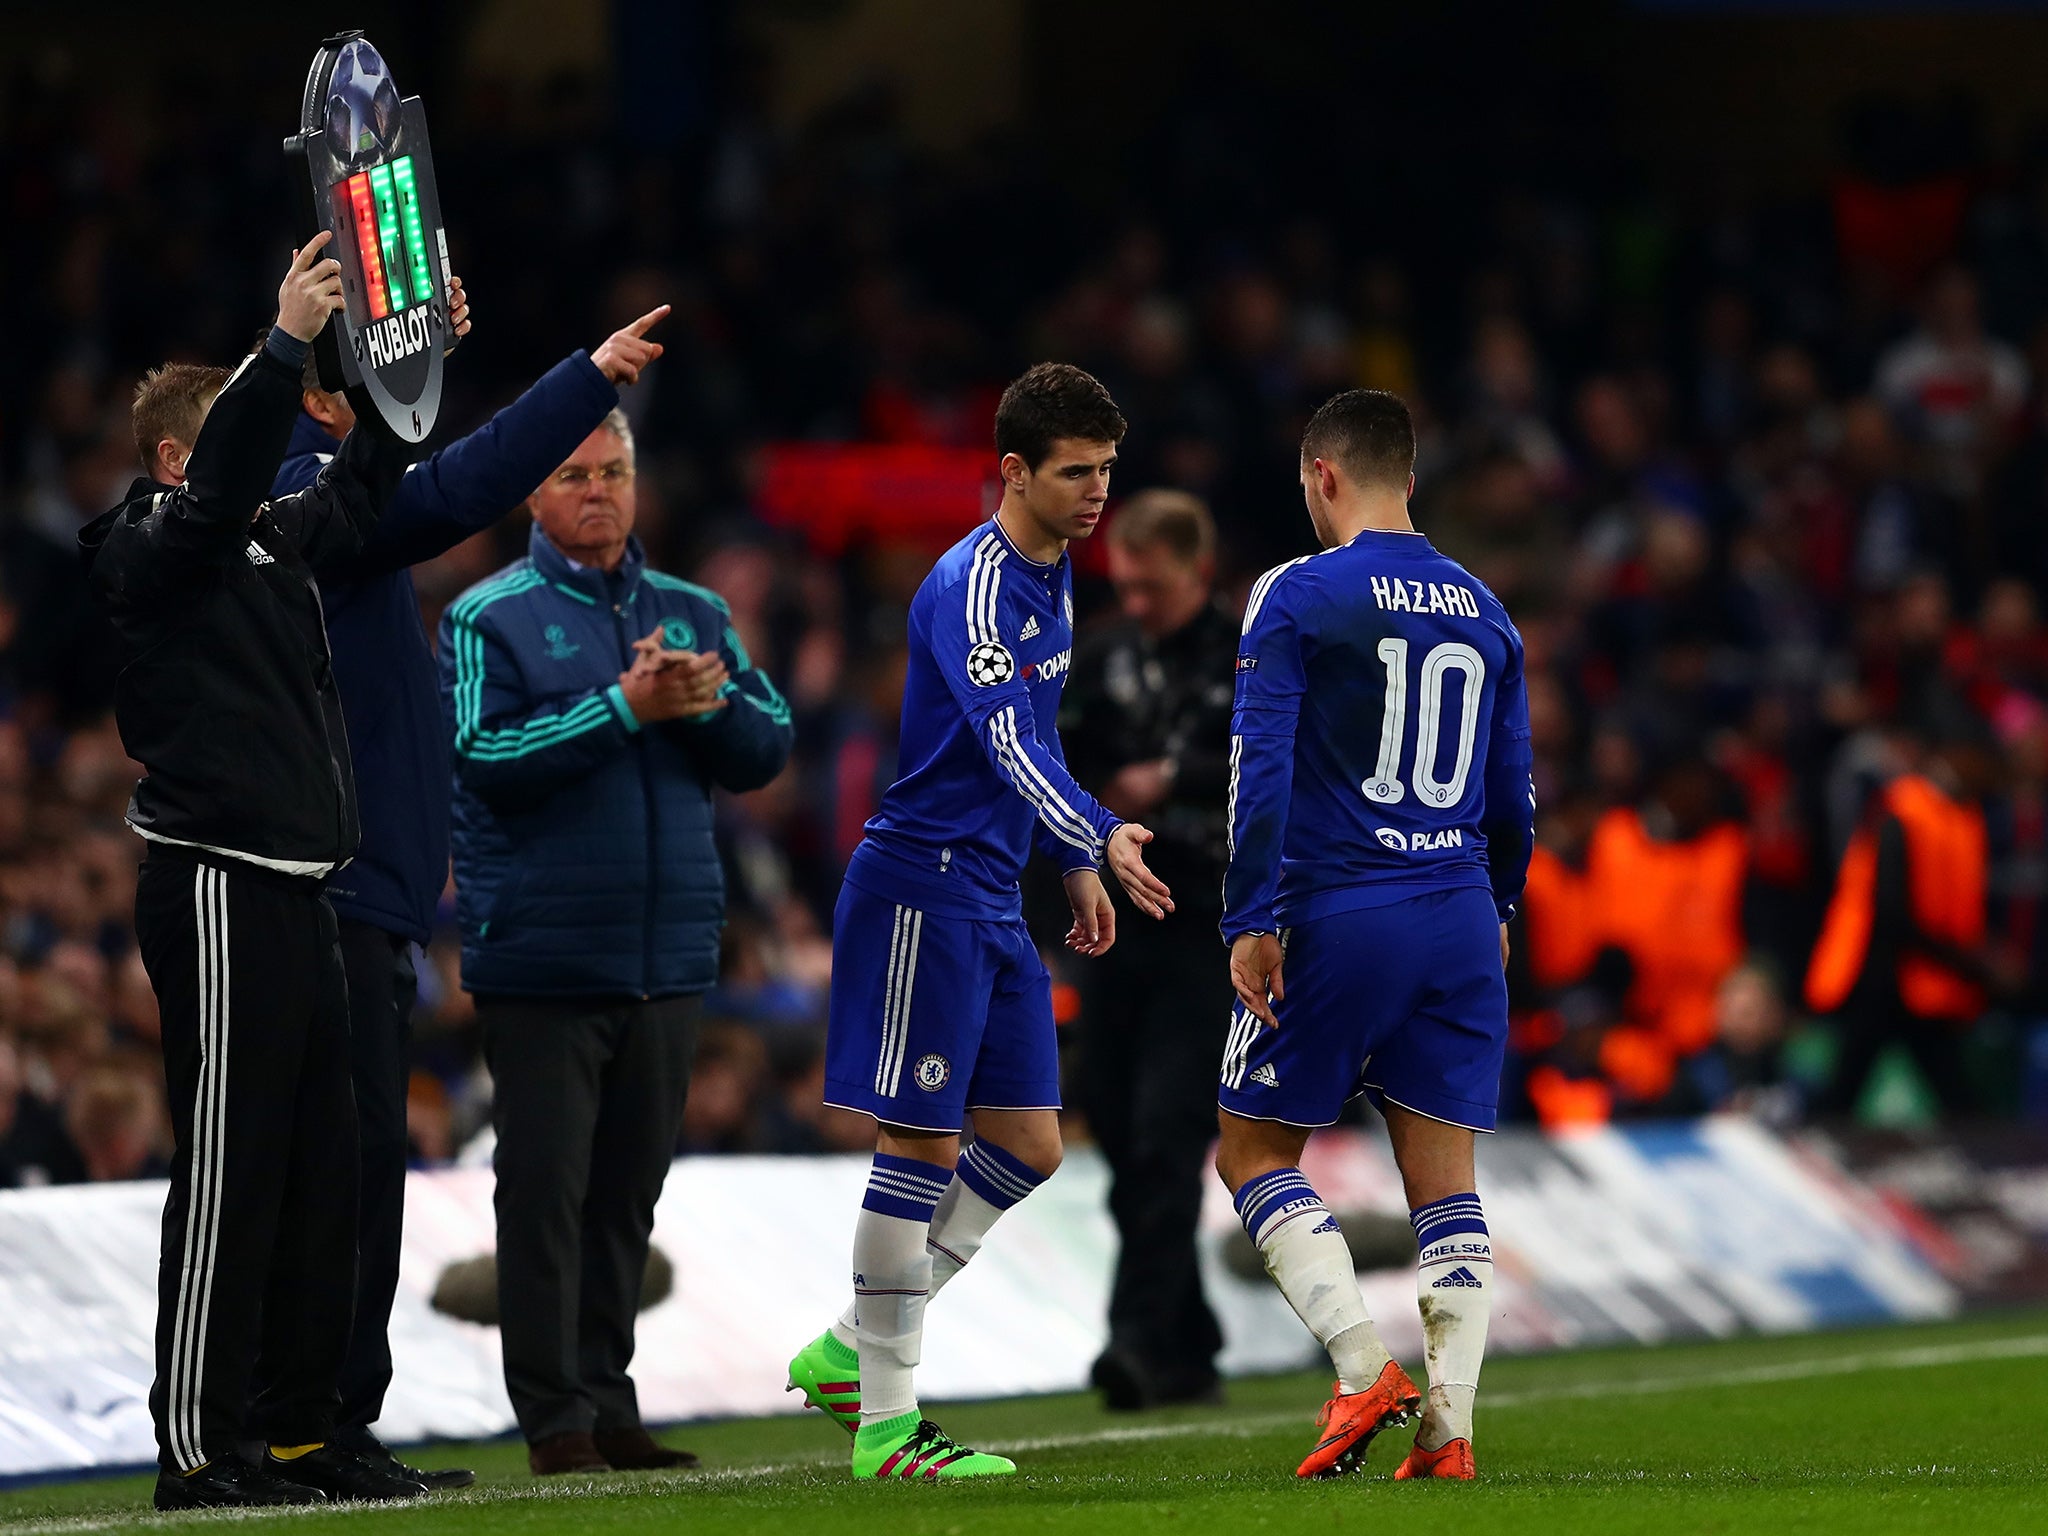 Eden Hazard is replaced by Oscar to cheers from the Chelsea crowd